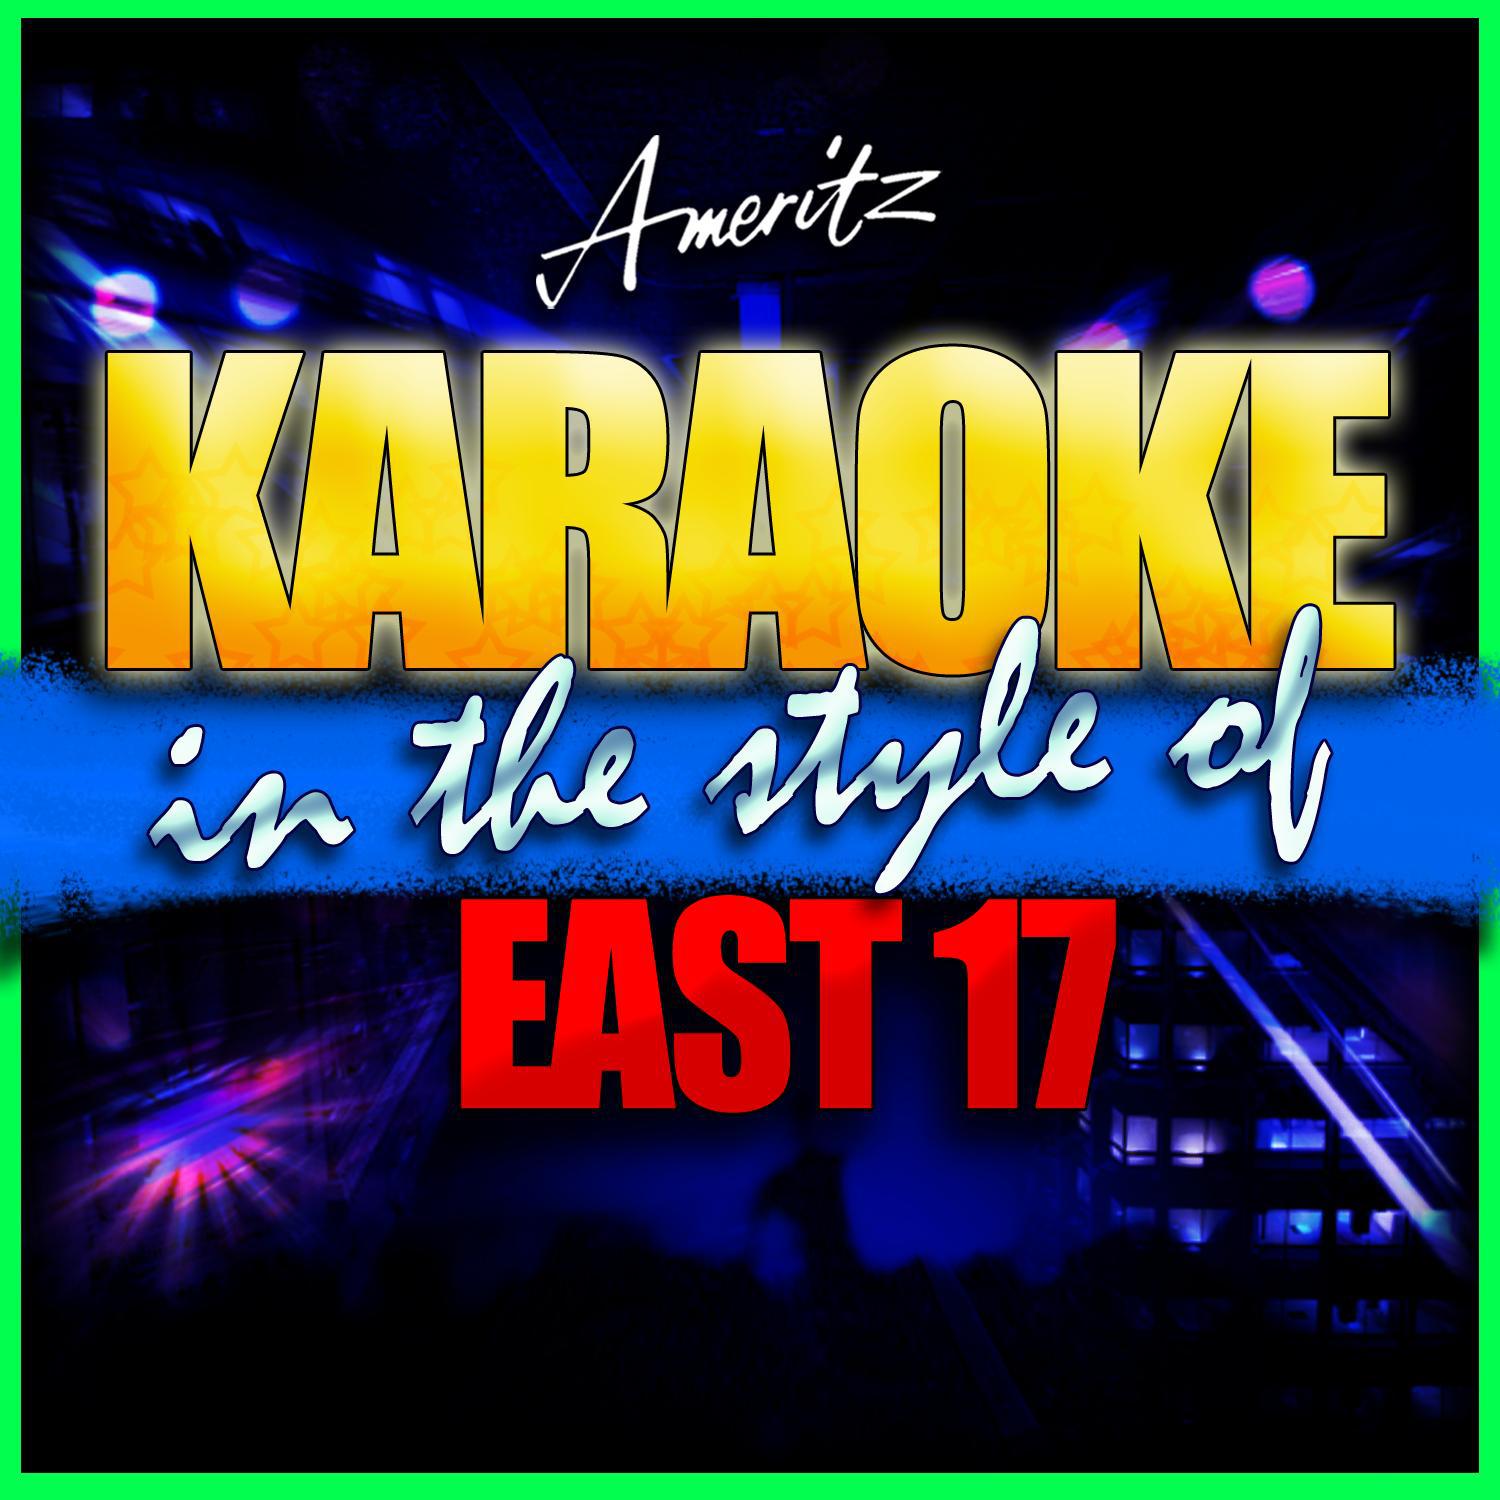 If You Ever (In the Style of East 17) [Karaoke Version]